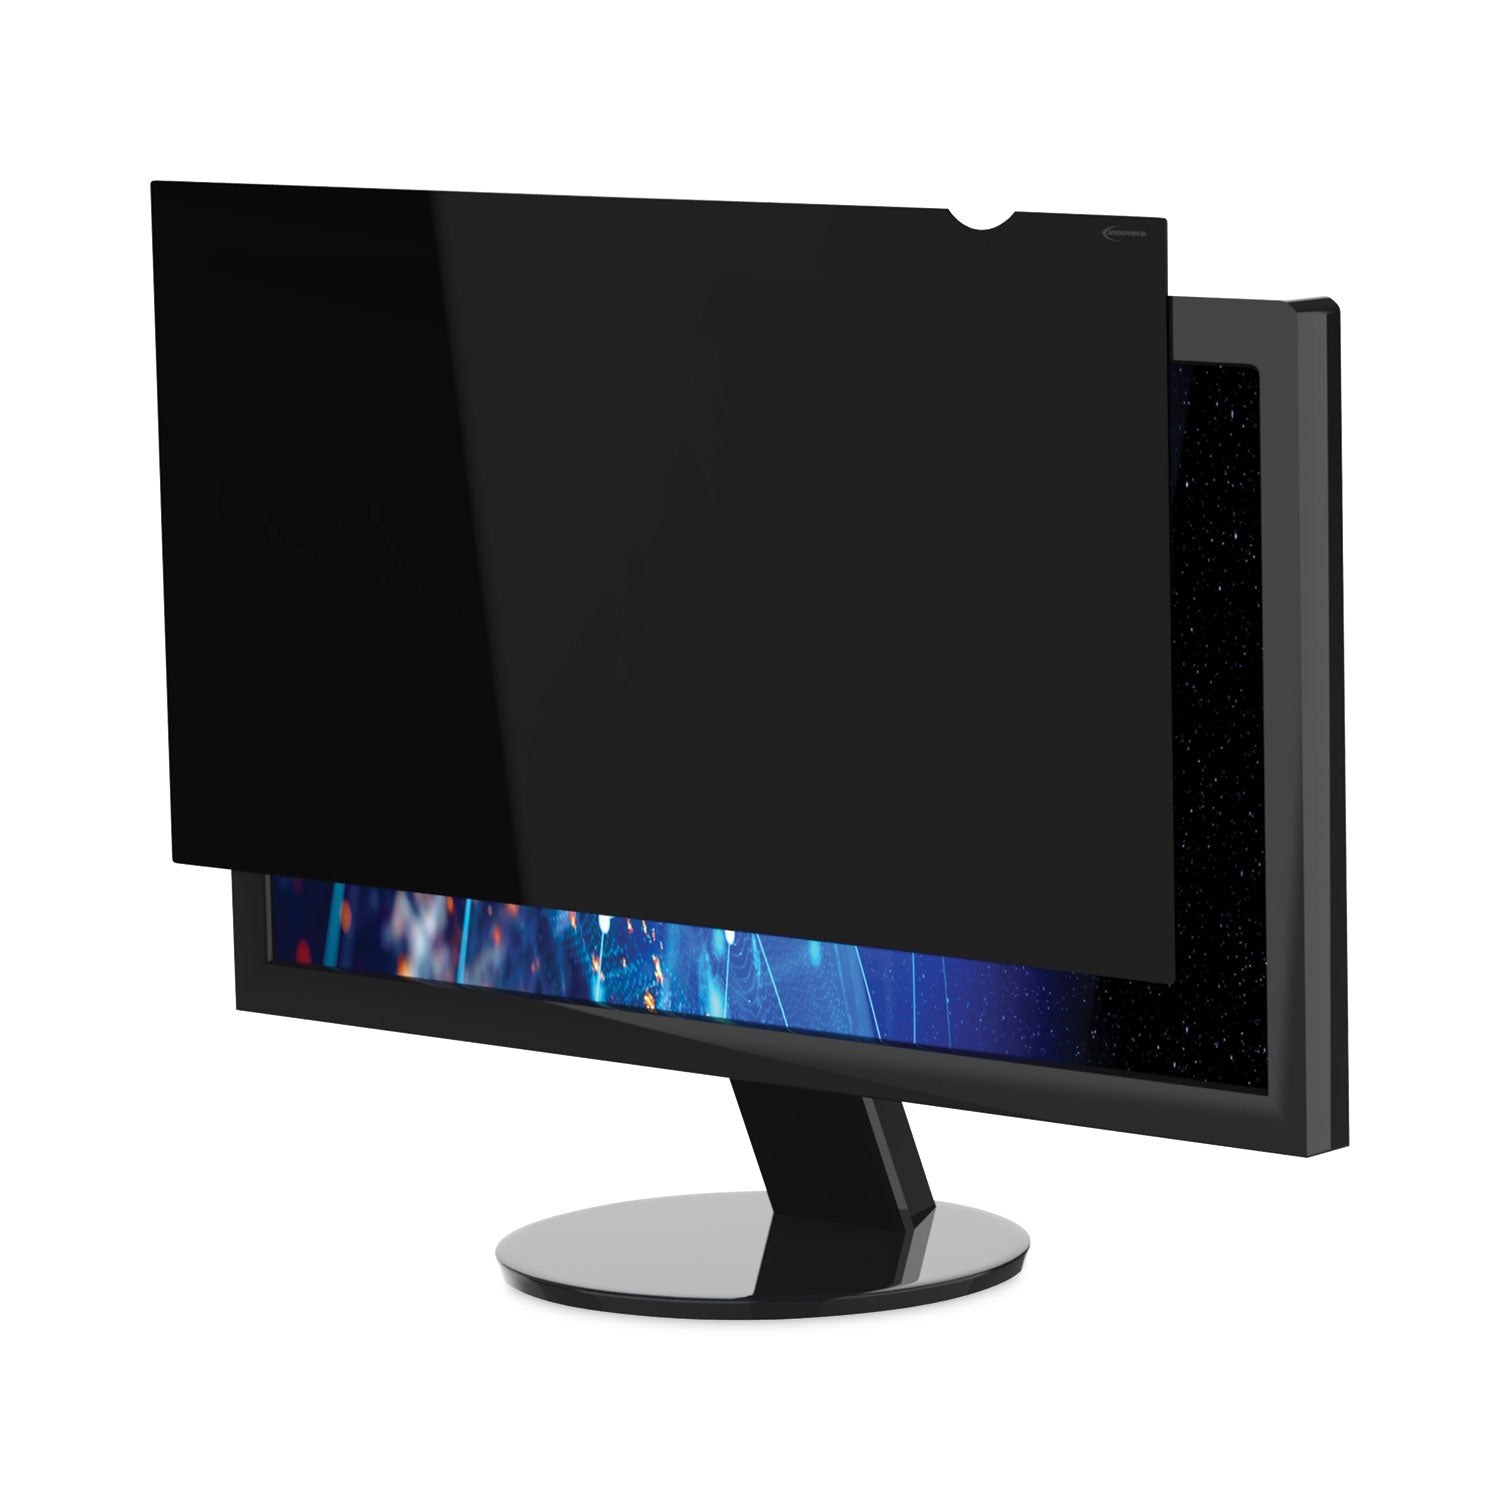 blackout-privacy-monitor-filter-for-195-widescreen-flat-panel-monitor-169-aspect-ratio_ivrblf195w - 3